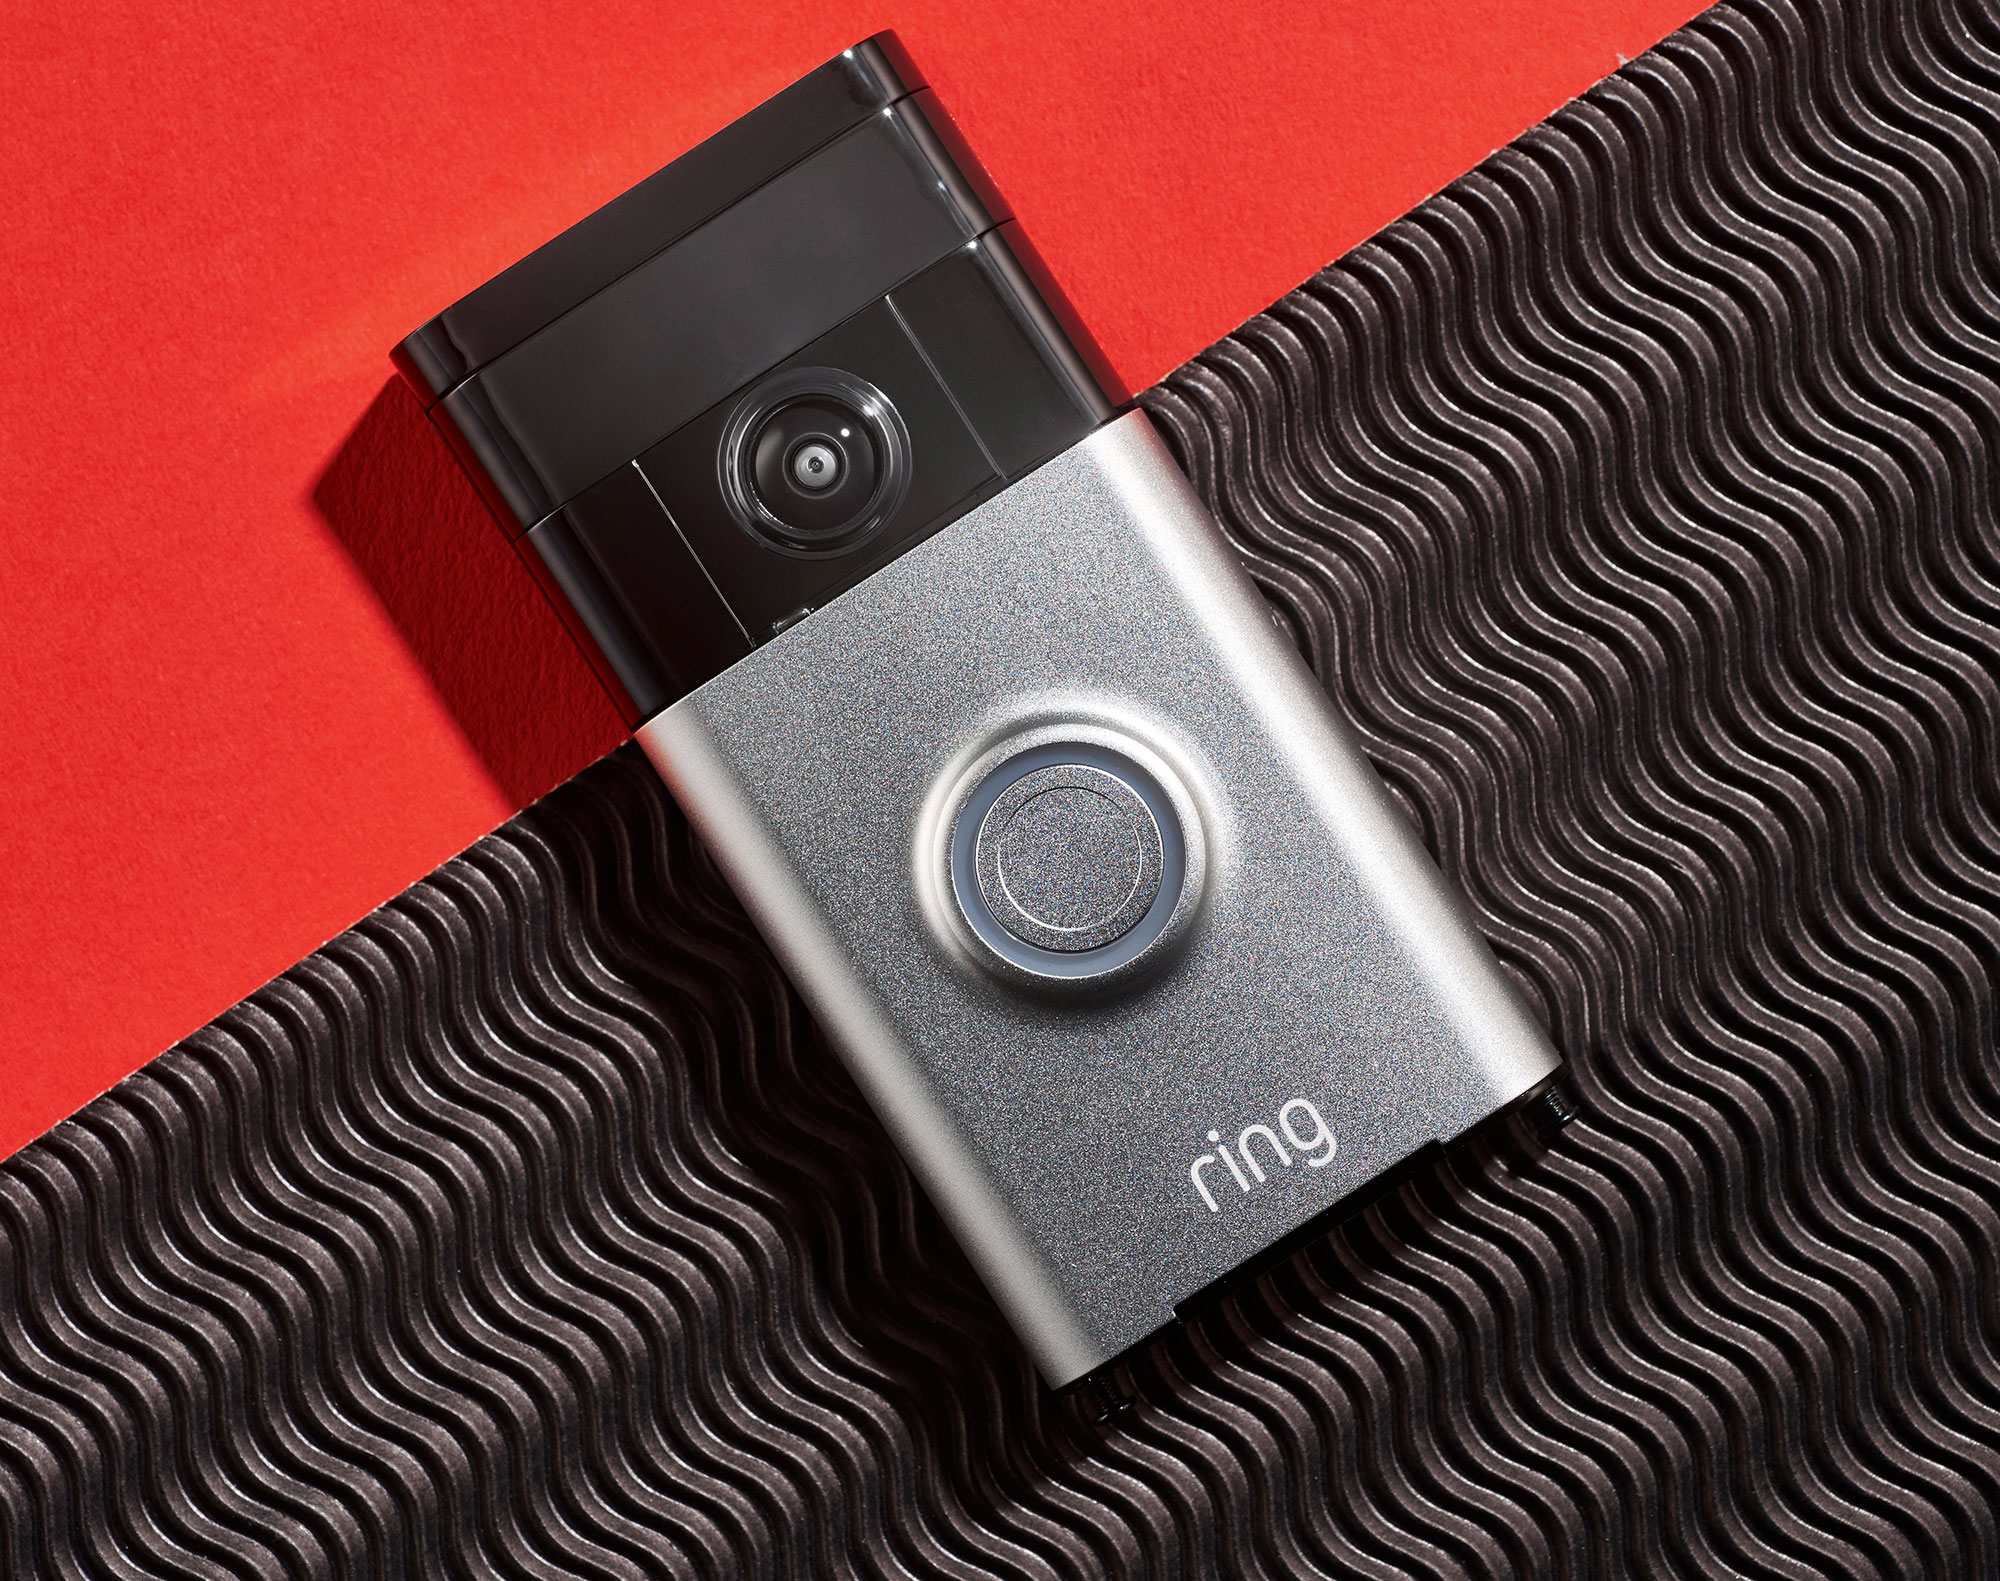 Why We Don't Recommend Ring Cameras | WIRED